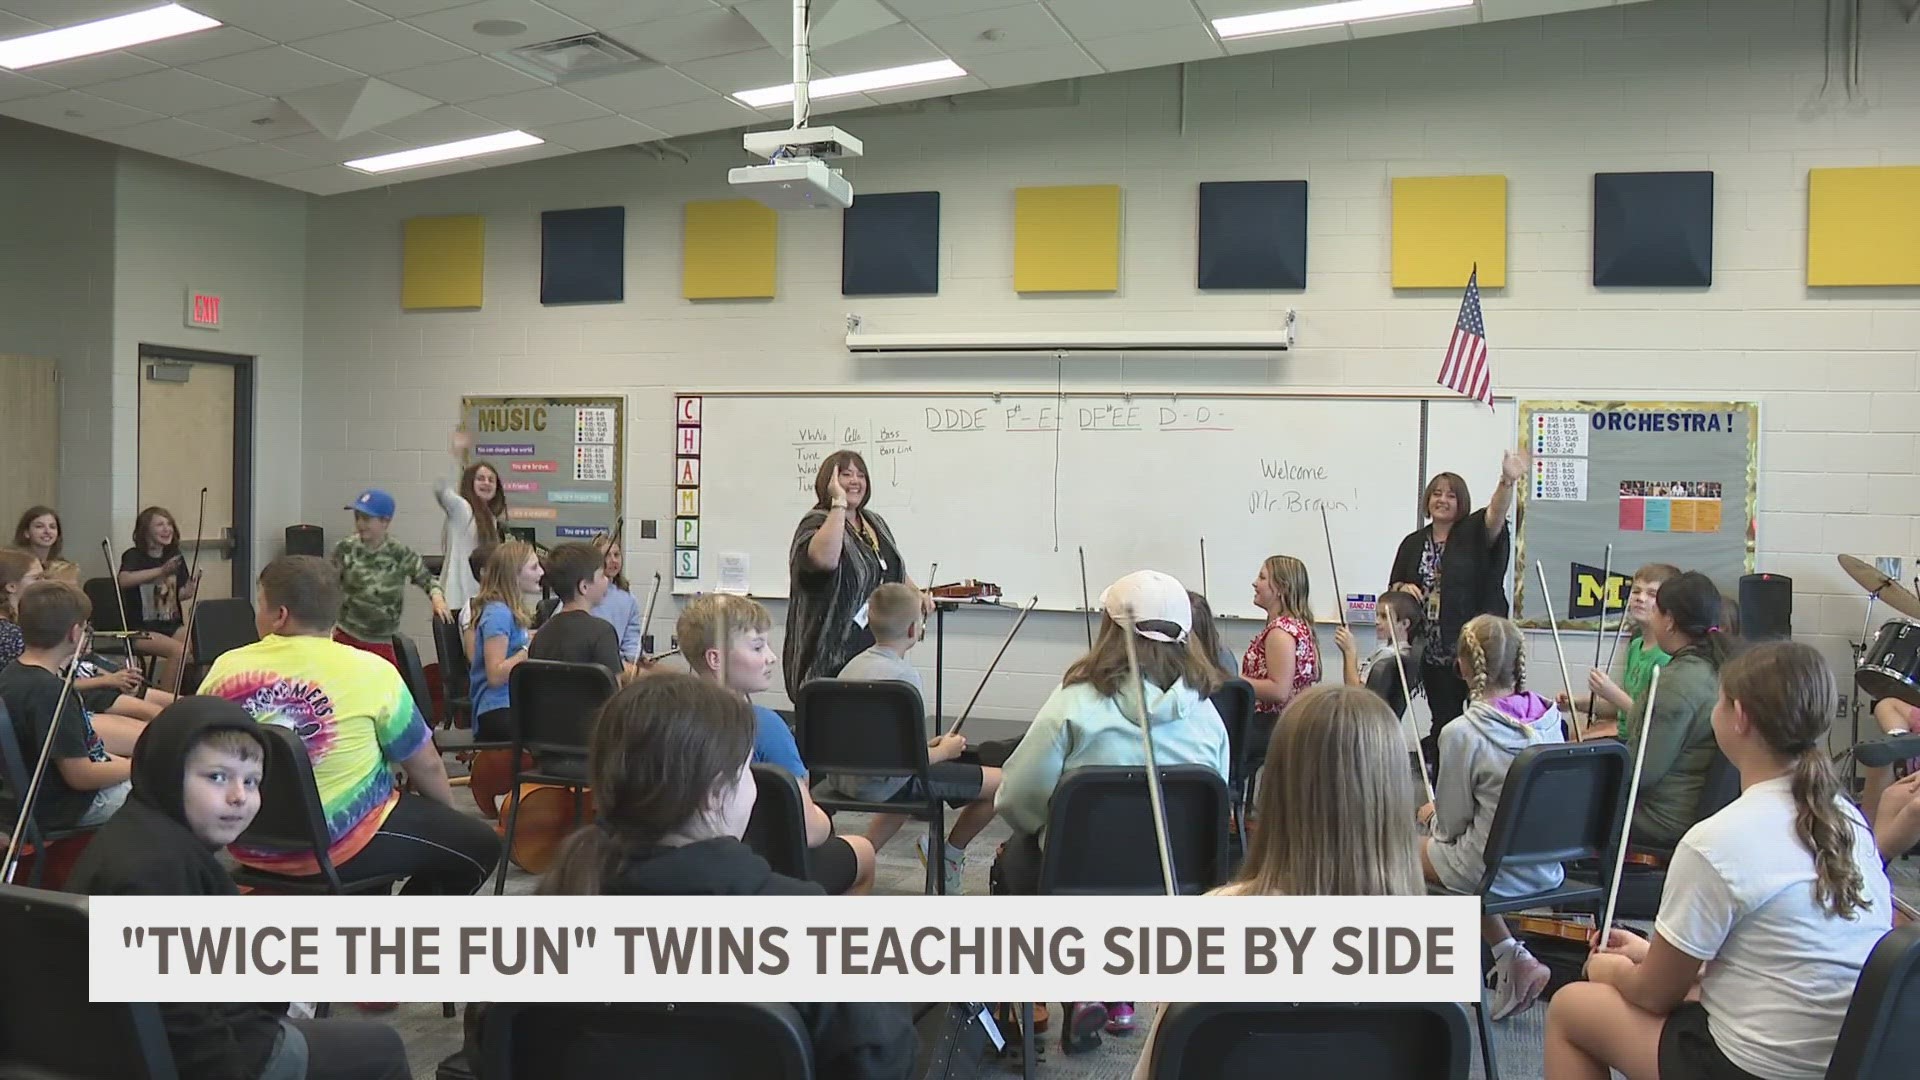 Becky Bush founded the Hudsonville Schools orchestra program in 2001, and now finds herself teaching side-by-side with her identical twin sister.